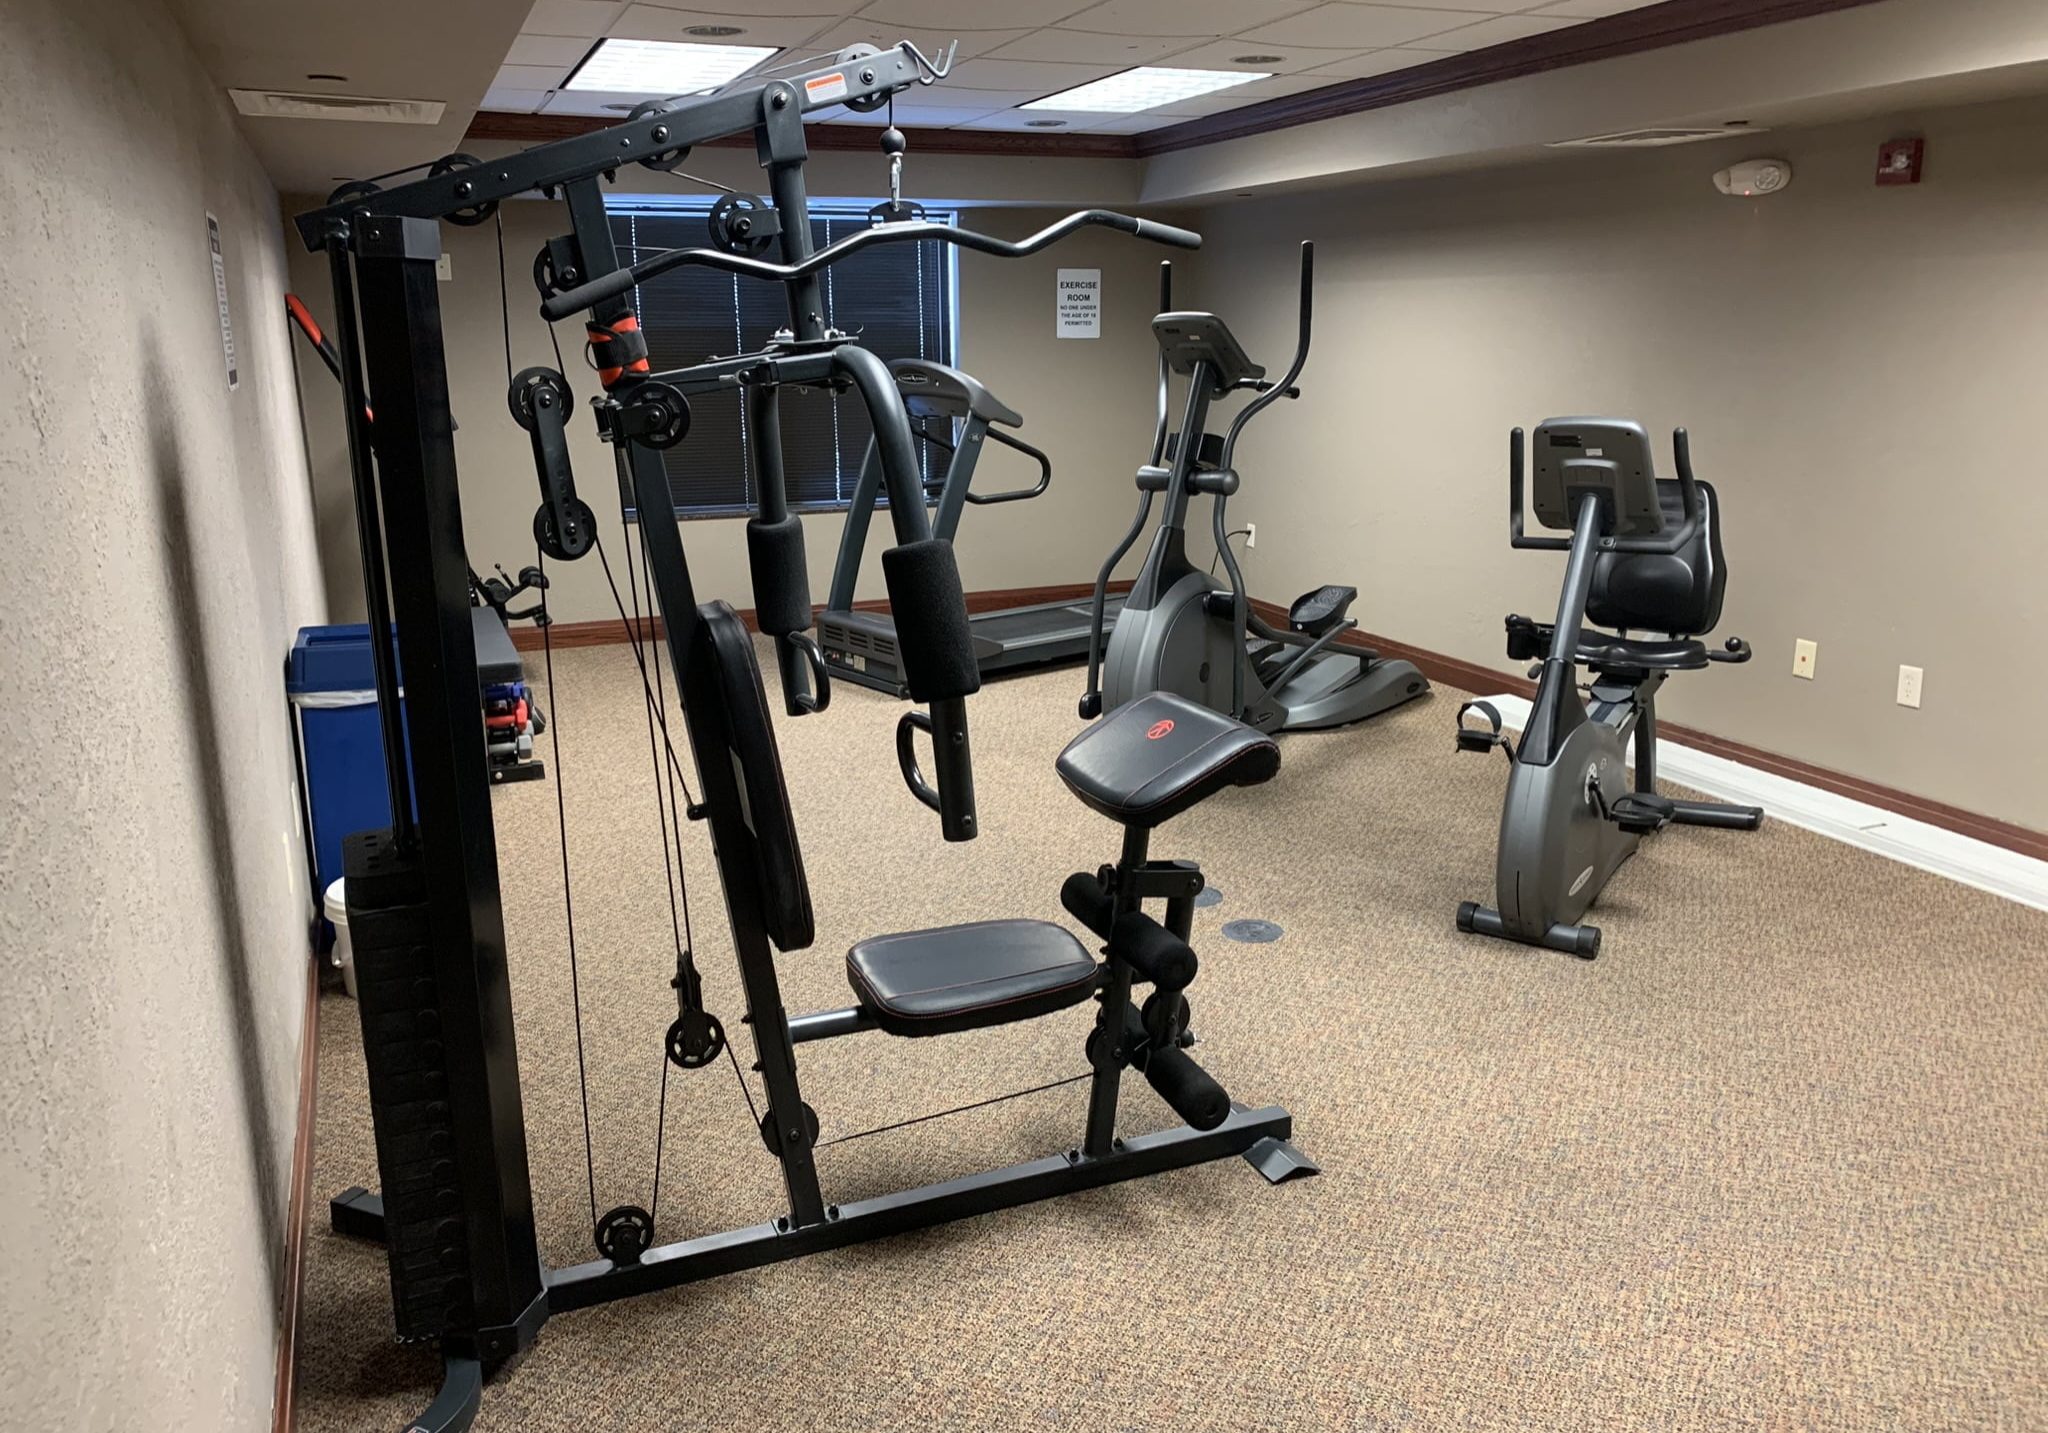 Mole Lake Casino Lodge in Crandon Wisconsin Has A Complimentary Exercise Room For Hotel Guests